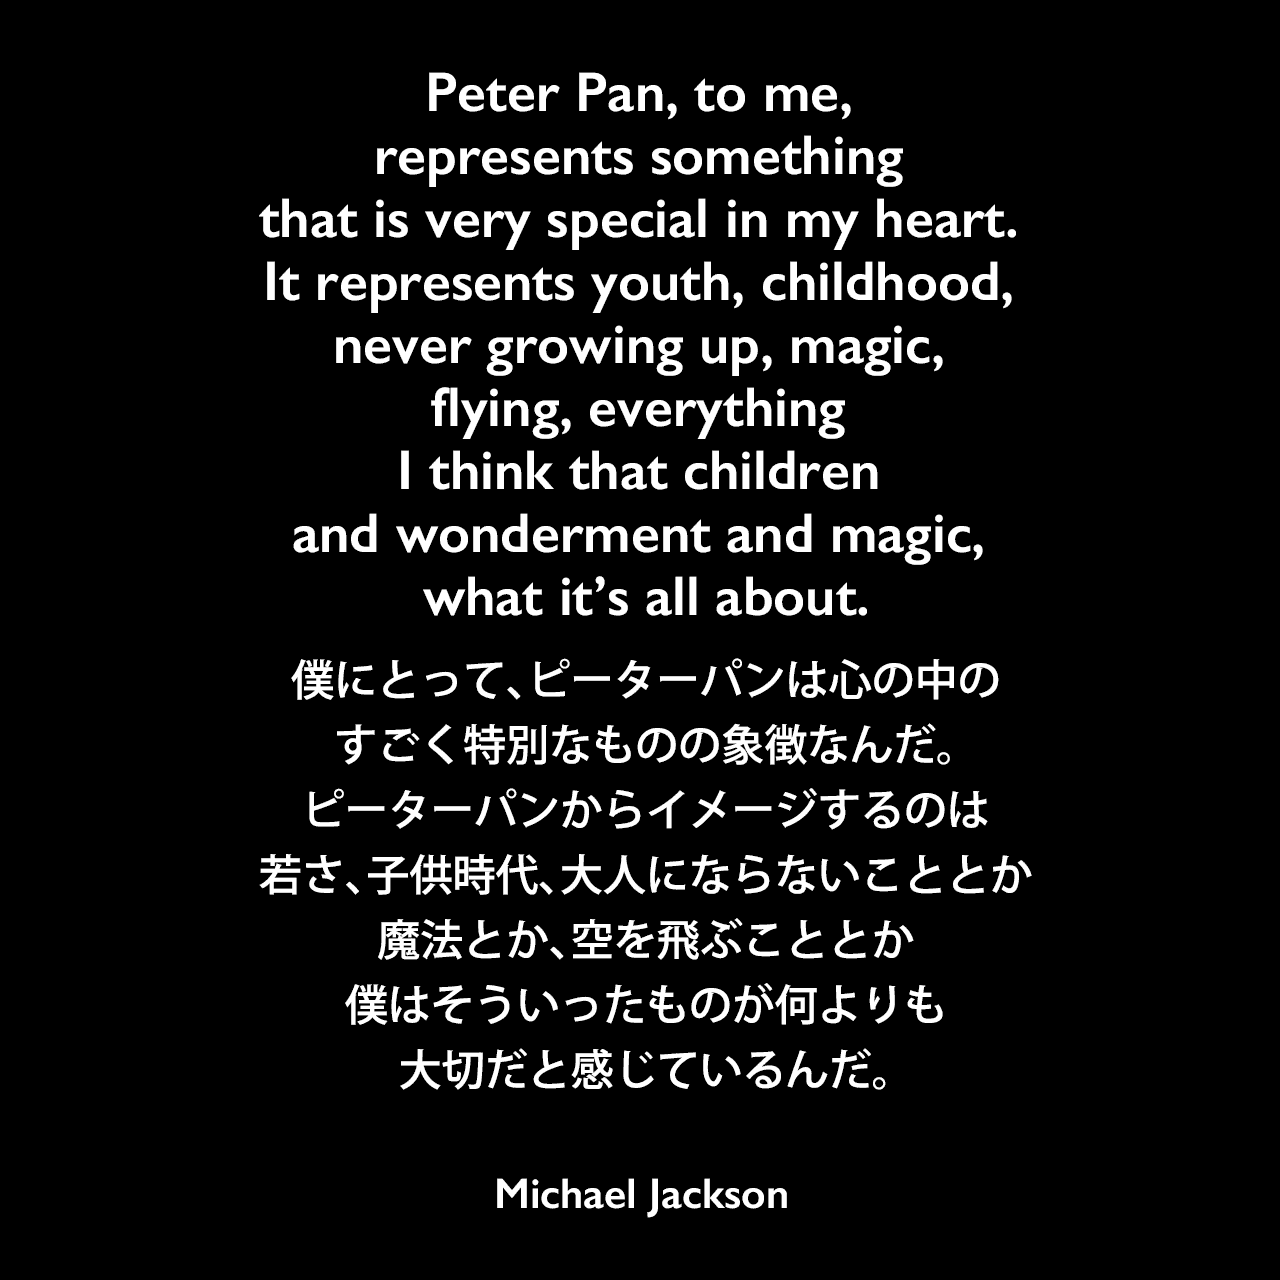 Peter Pan, to me, represents something that is very special in my heart. It represents youth, childhood, never growing up, magic, flying, everything I think that children and wonderment and magic, what it’s all about.僕にとって、ピーターパンは心の中のすごく特別なものの象徴なんだ。ピーターパンからイメージするのは若さ、子供時代、大人にならないこととか、魔法とか、空を飛ぶこととか、僕はそういったものが何よりも大切だと感じているんだ。Michael Jackson